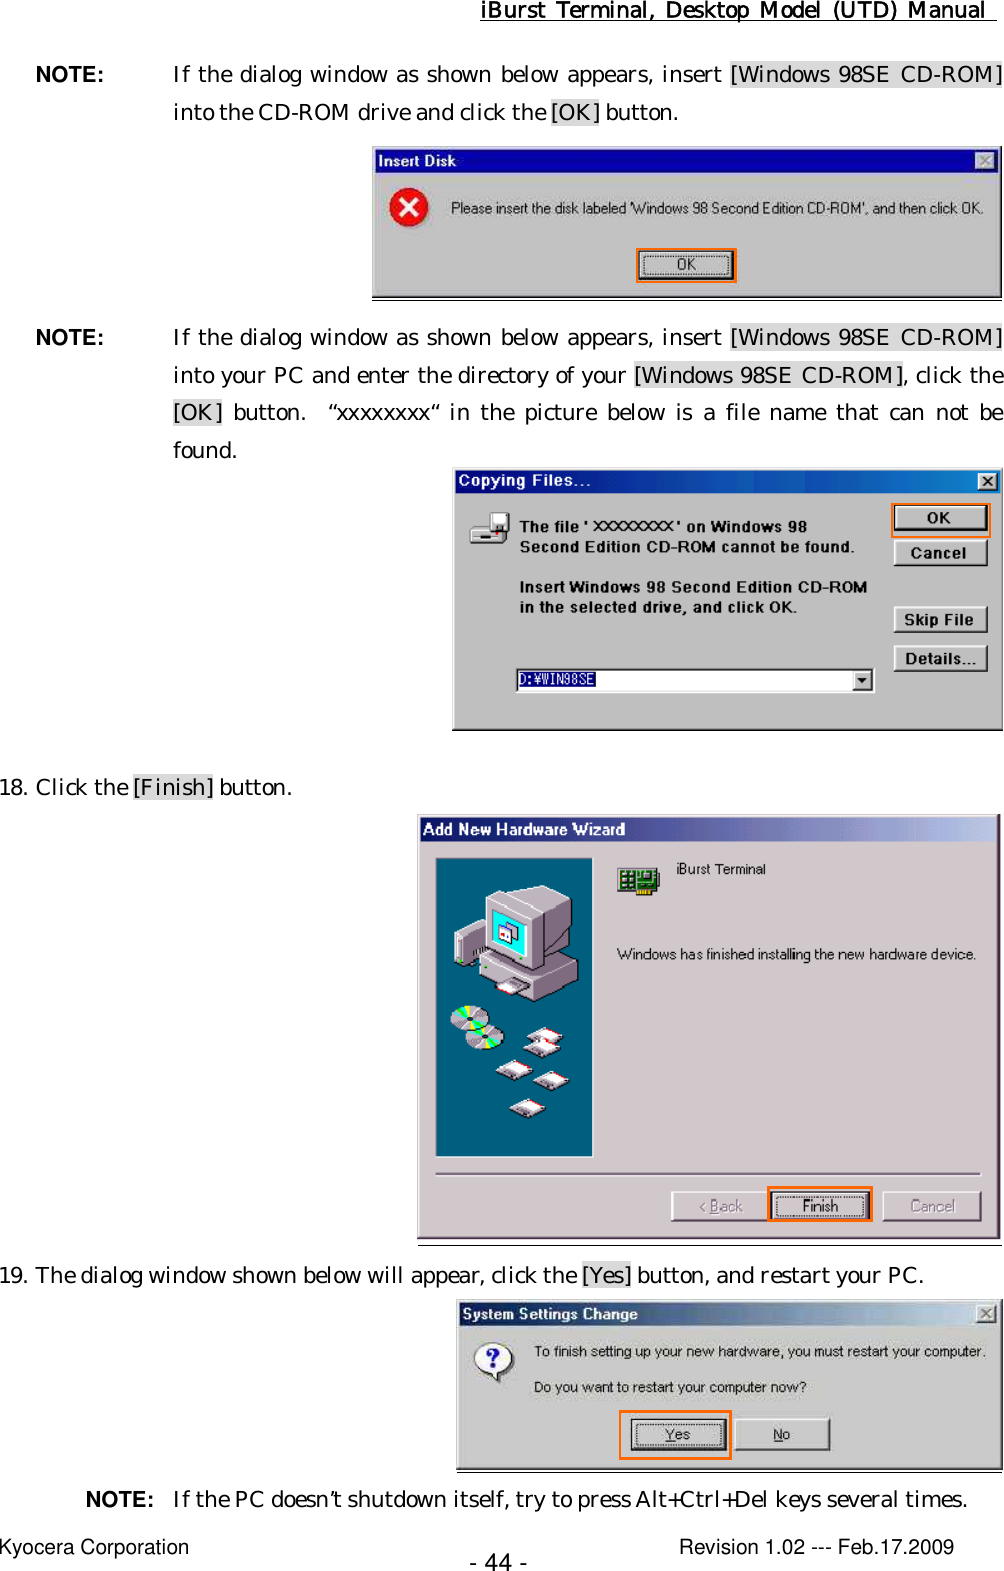 iBurst  Terminal, Desktop  Model  (UTD)  Manual    Kyocera Corporation                                                                                              Revision 1.02 --- Feb.17.2009 - 44 - NOTE:  If the dialog window as shown below appears, insert [Windows 98SE CD-ROM] into the CD-ROM drive and click the [OK] button.  NOTE:  If the dialog window as shown below appears, insert [Windows 98SE CD-ROM] into your PC and enter the directory of your [Windows 98SE CD-ROM], click the [OK]  button.   “xxxxxxxx“  in  the  picture  below  is a file name that can  not  be found.   18. Click the [Finish] button.  19. The dialog window shown below will appear, click the [Yes] button, and restart your PC.  NOTE:  If the PC doesn’t shutdown itself, try to press Alt+Ctrl+Del keys several times. 